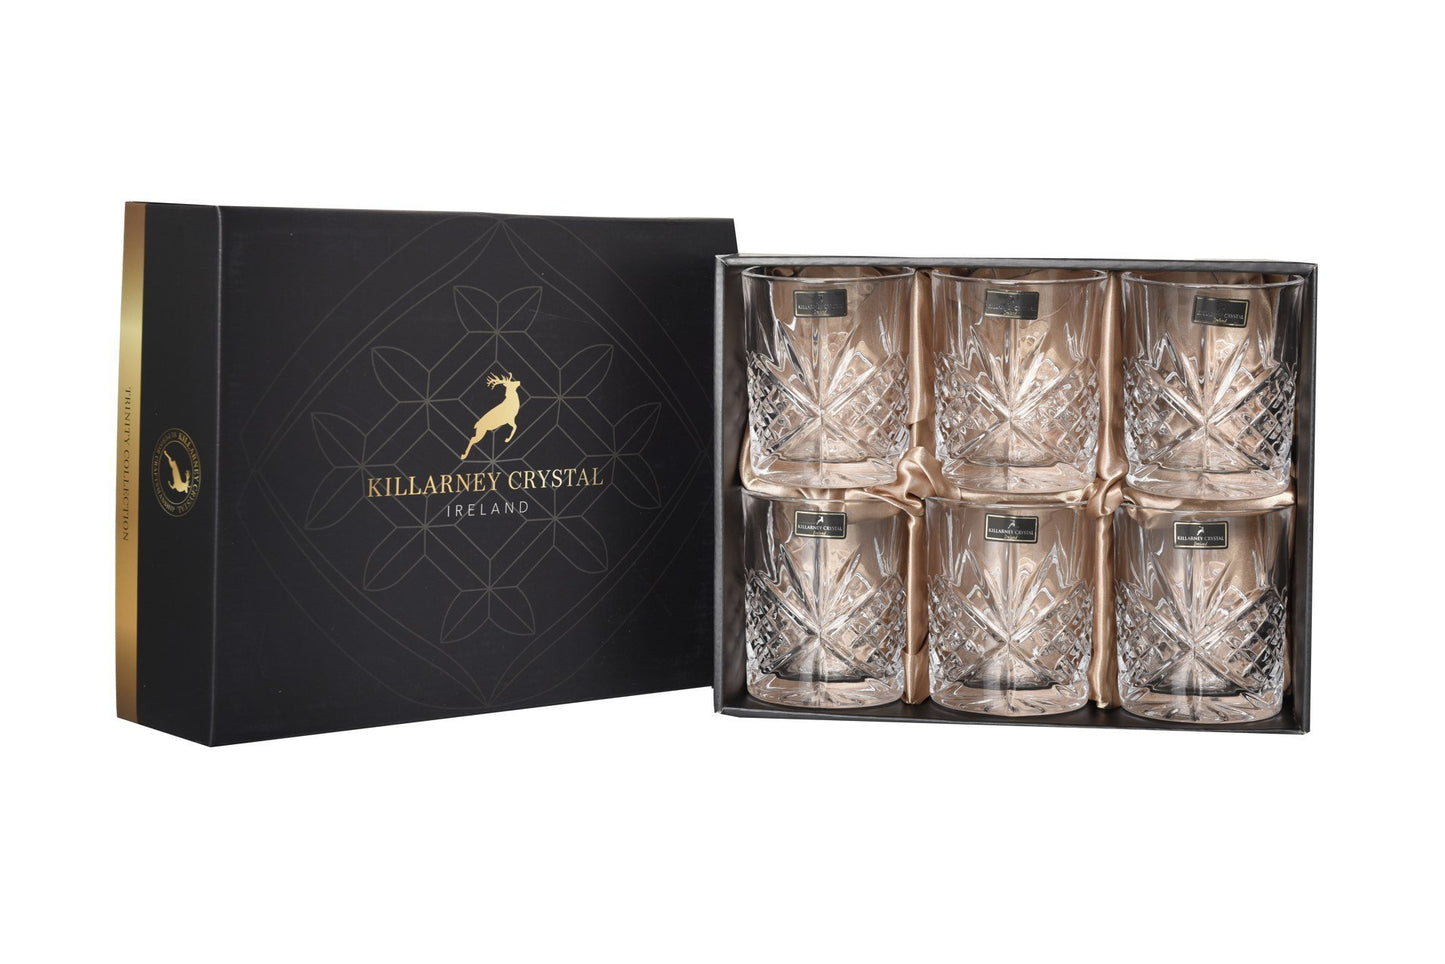 Killarney Crystal Trinity Whiskey Glasses - A & M News and Gifts